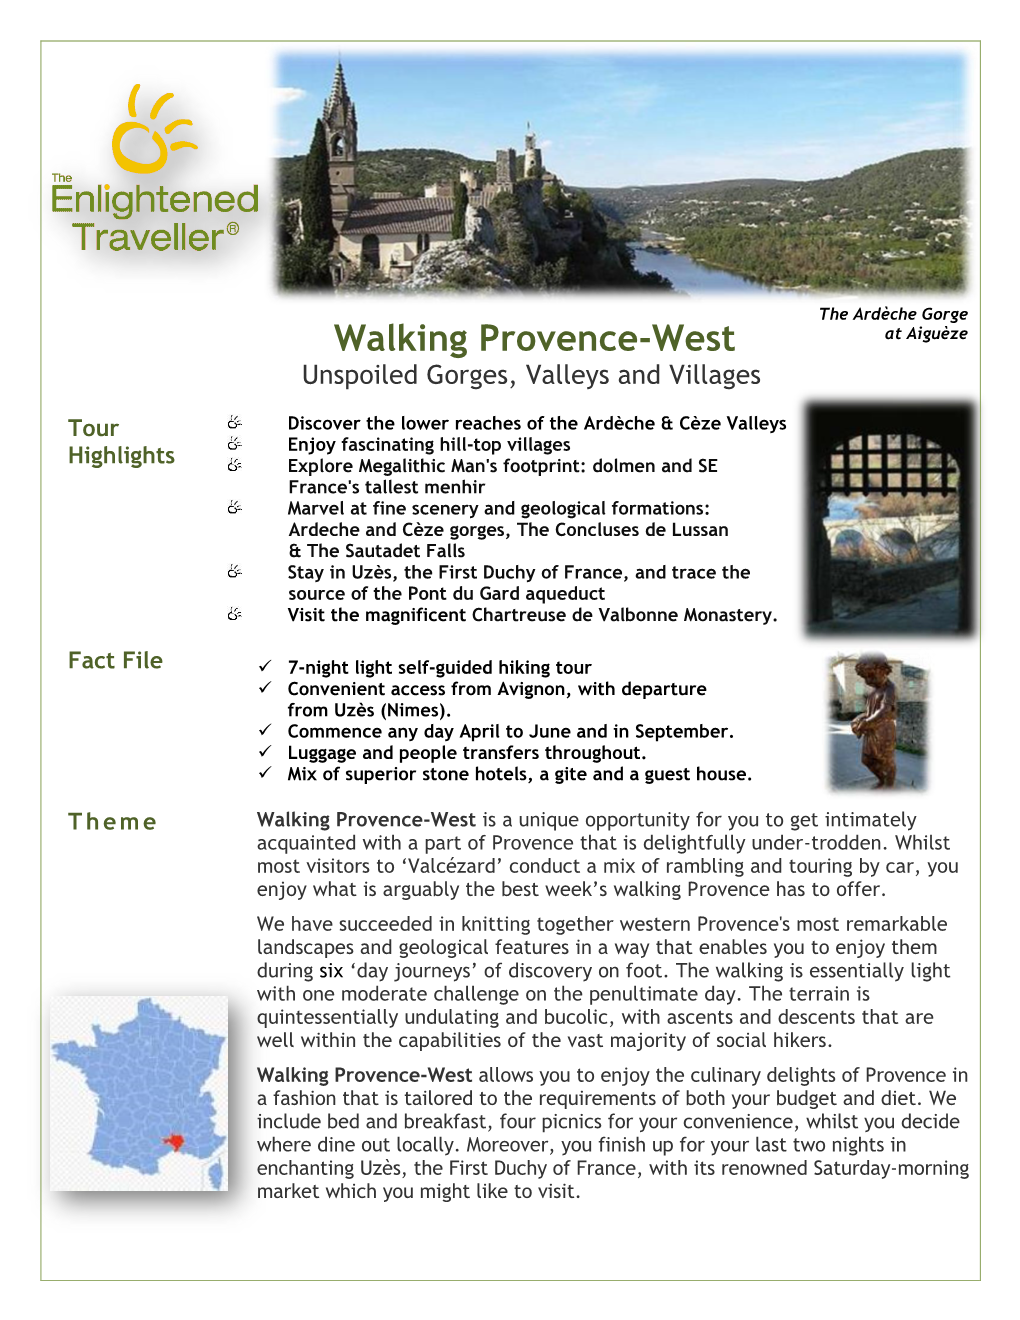 Walking Provence-West at Aiguèze Unspoiled Gorges, Valleys and Villages